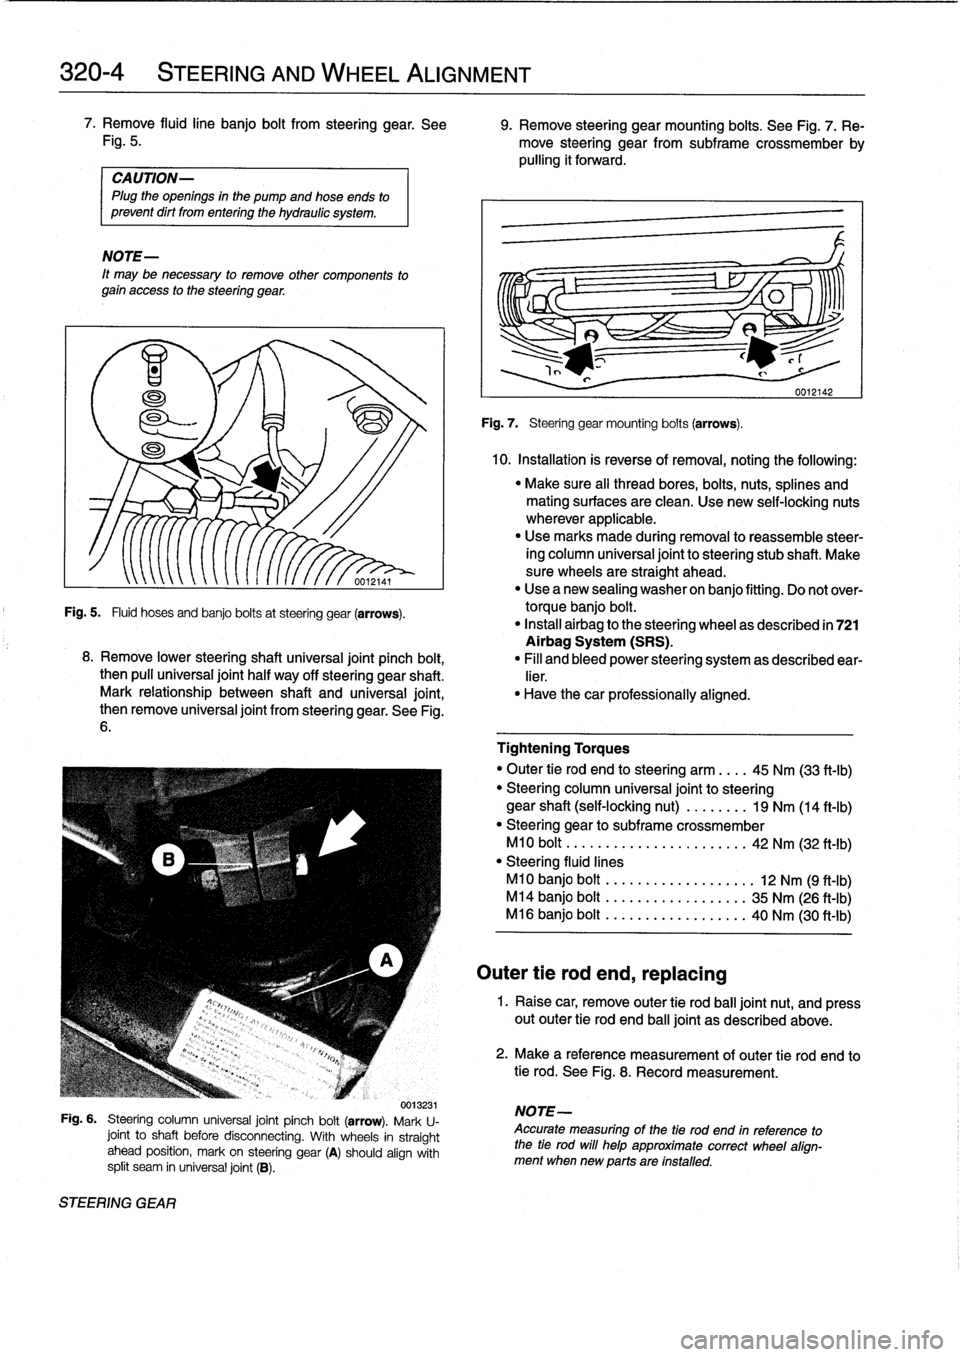 BMW 323i 1993 E36 Workshop Manual 
320-
4

	

STEERING
AND
WHEEL
ALIGNMENT

7
.
Remove
fluidline
banjo
bolt
from
steering
gear
.
See

	

9
.
Remove
steering
gearmounting
bolts
.
See
Fig
.
7
.
Re
Fig
.
5
.

	

move
steering
gear
from
s